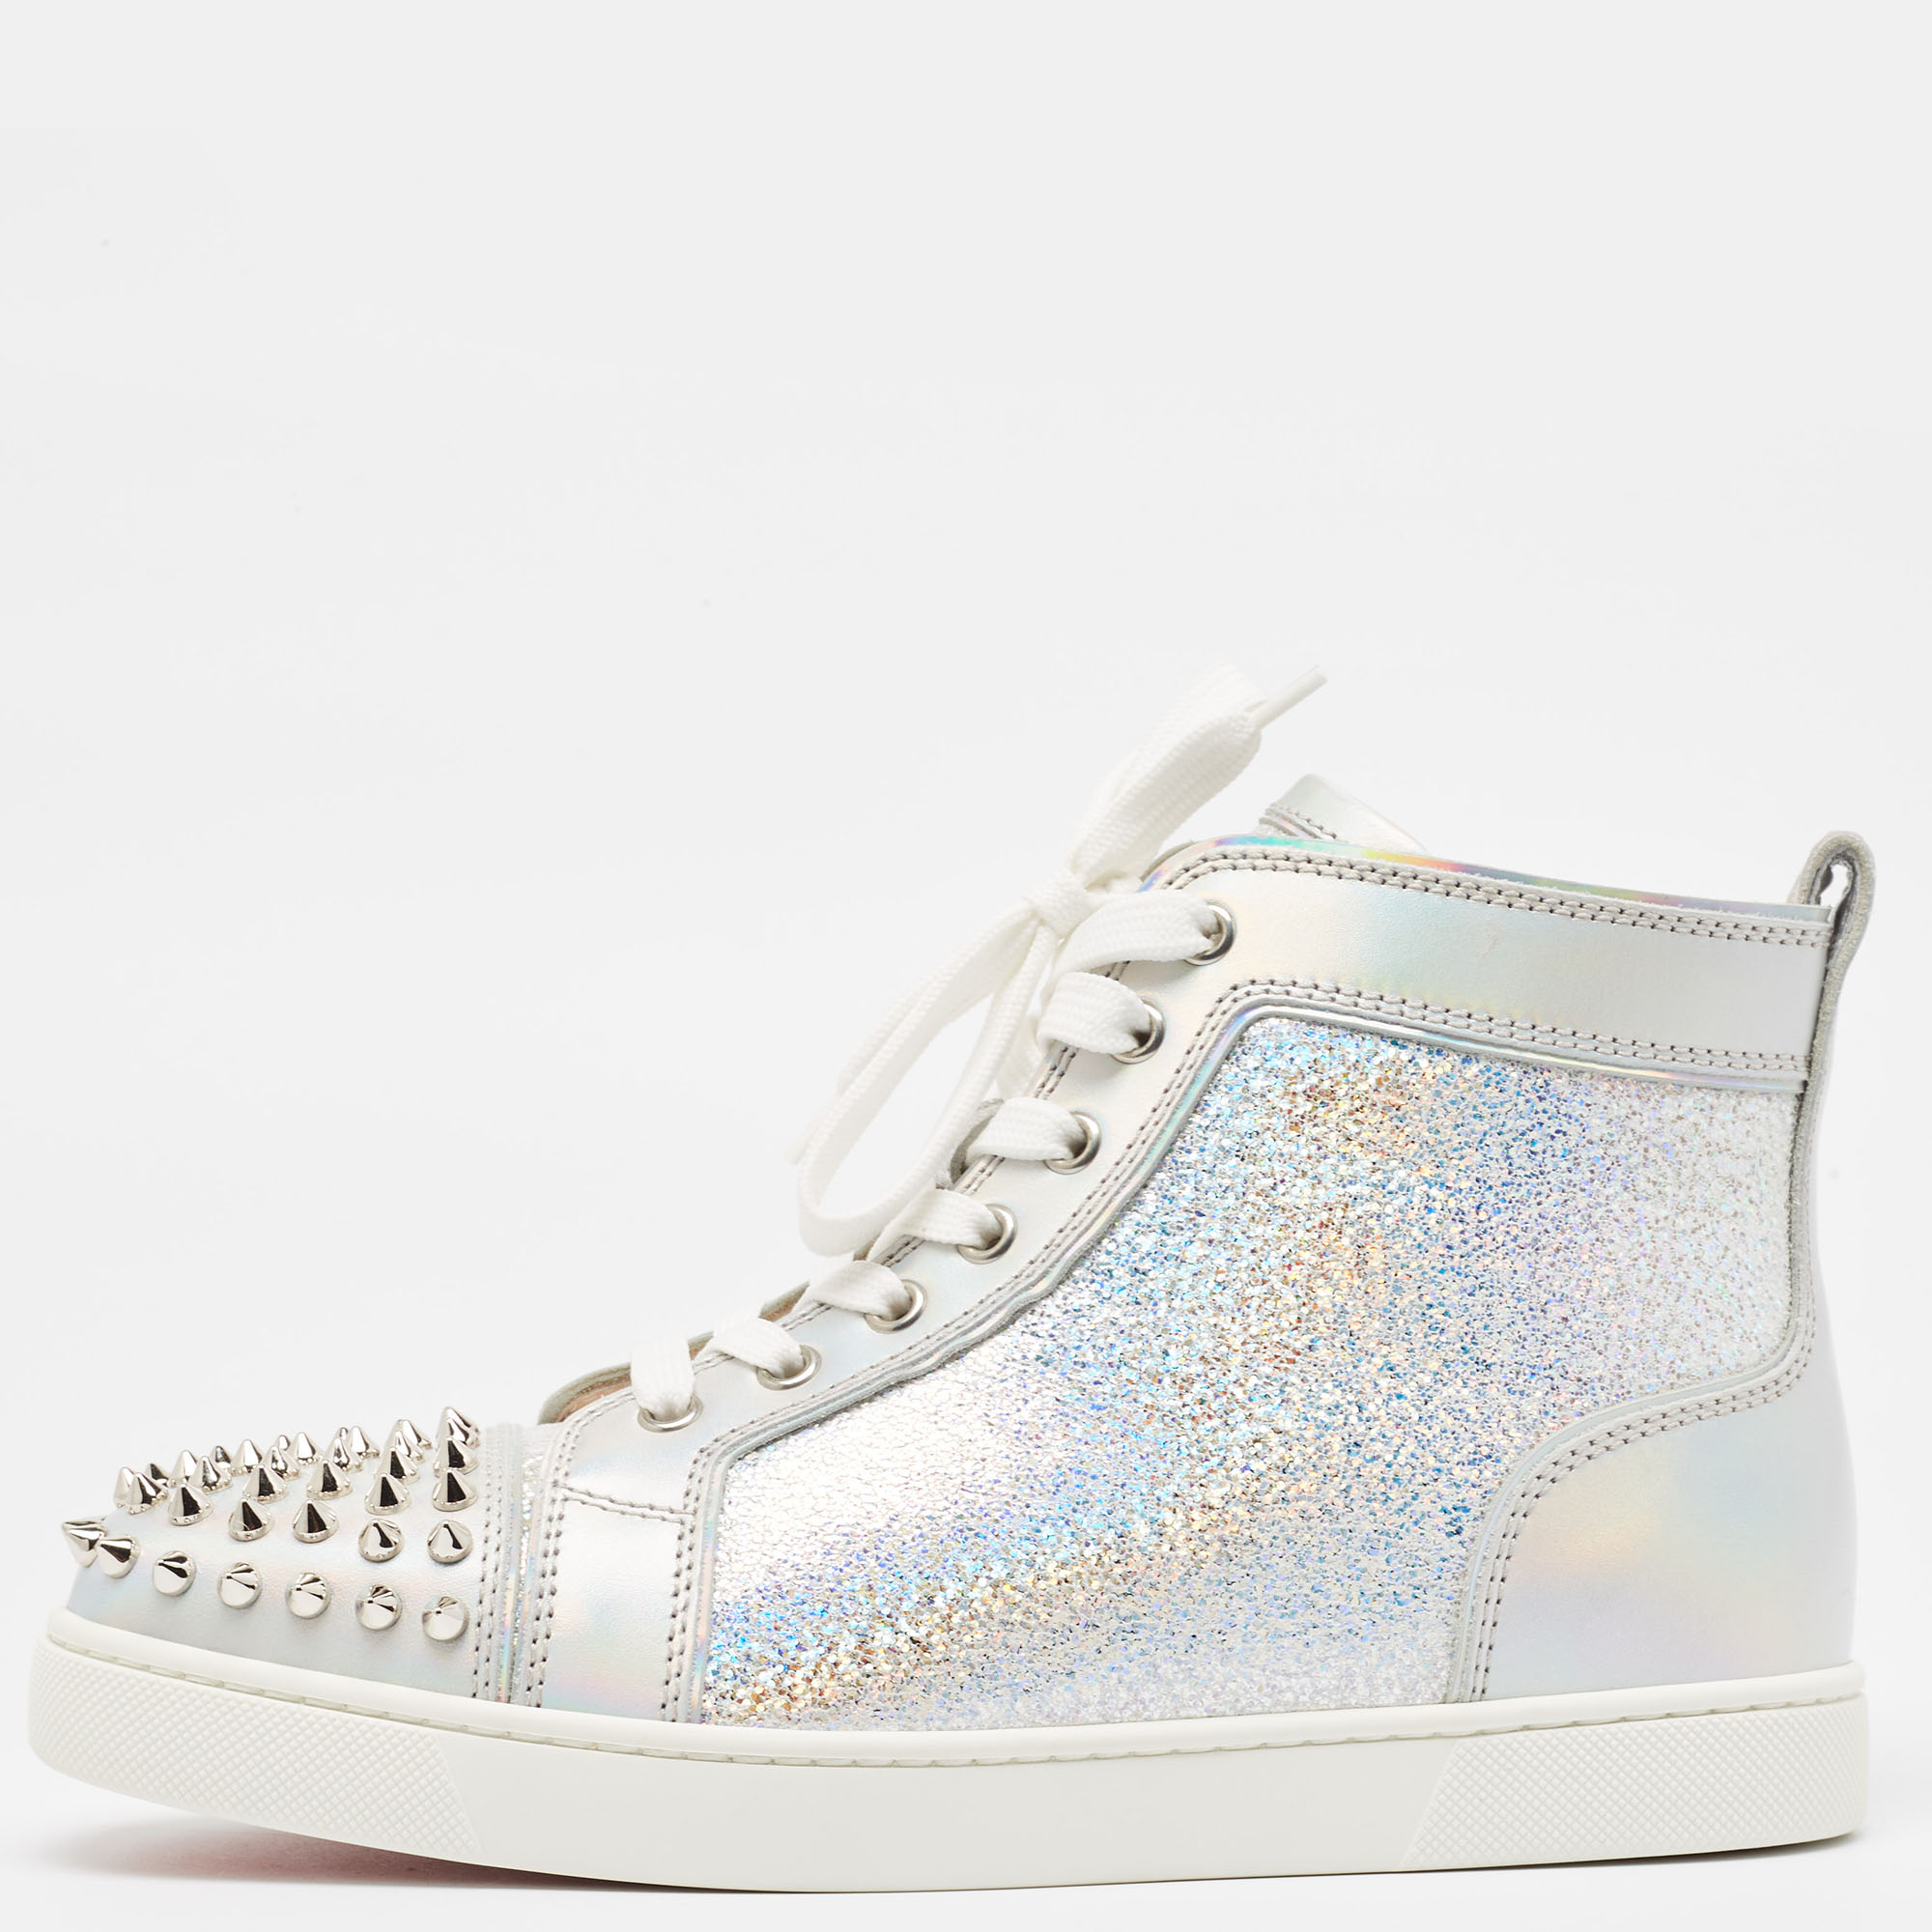 Pre-owned Christian Louboutin Metallic Leather And Glitter Suede Lou Spikes Sneakers Size 39